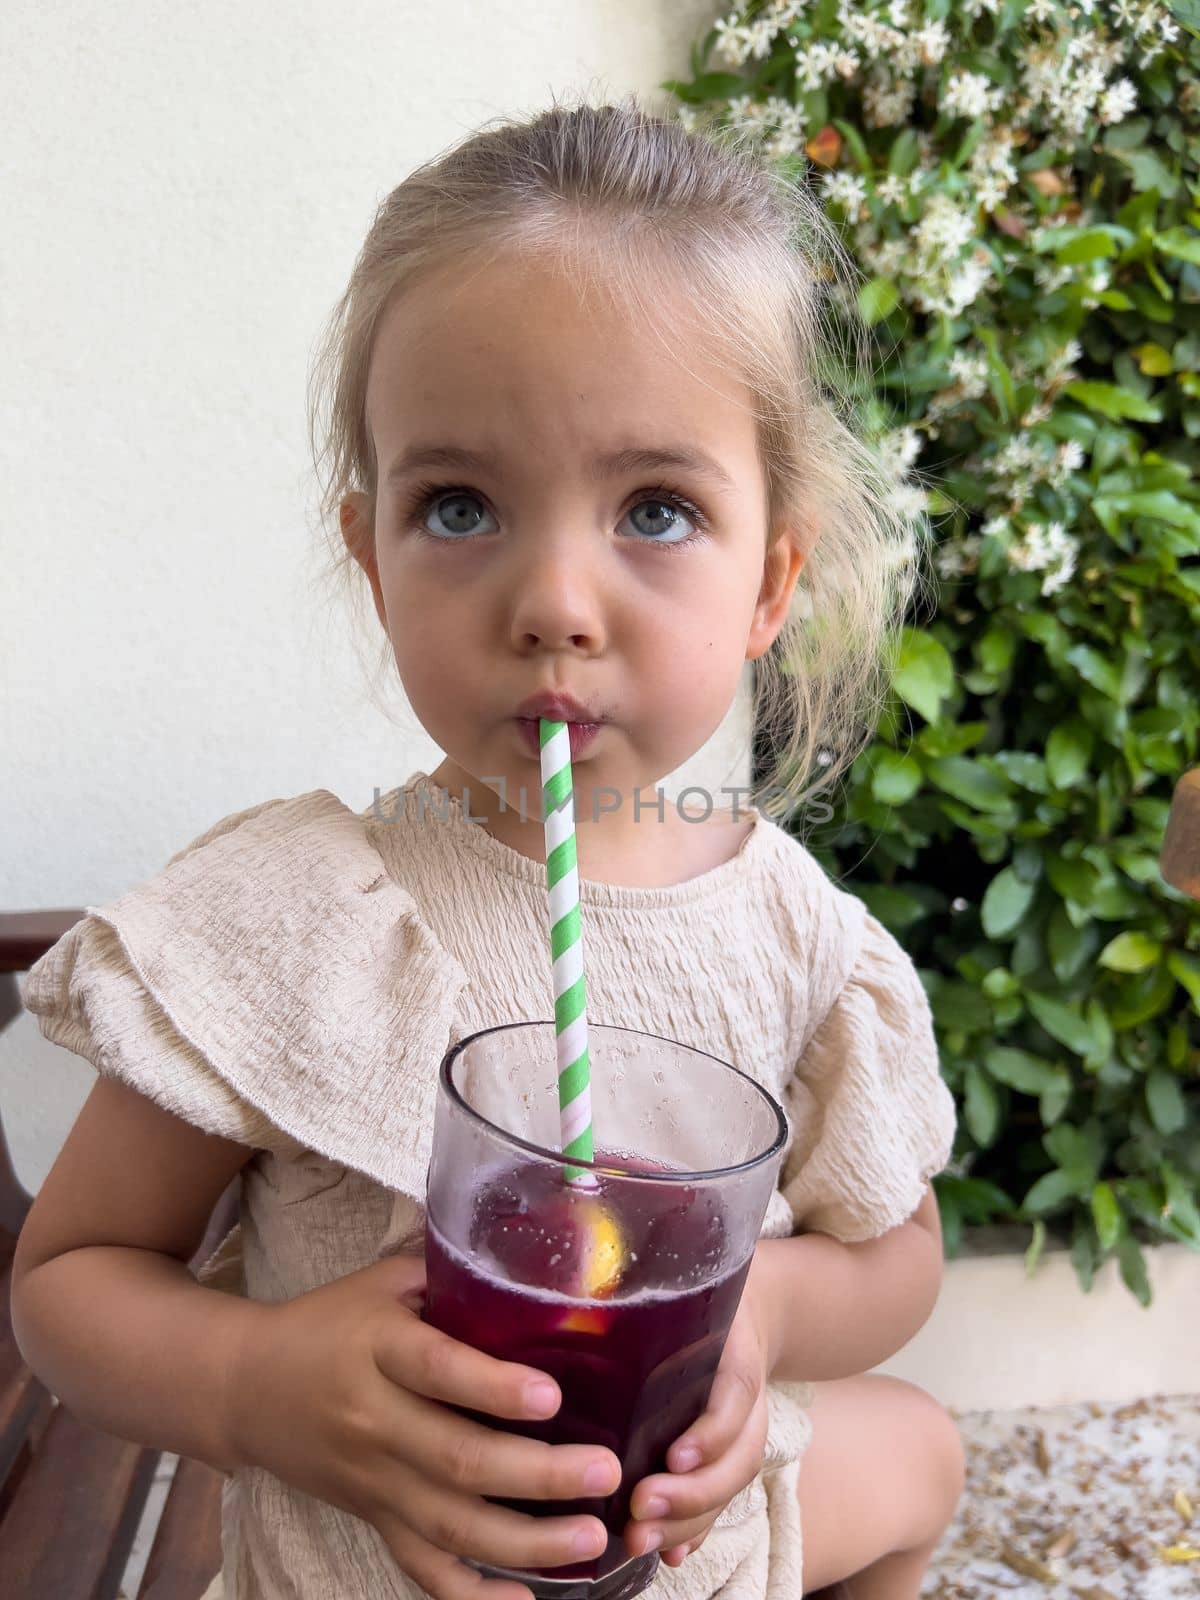 Little girl drinks juice through a straw from a glass holding it in her hands. High quality photo